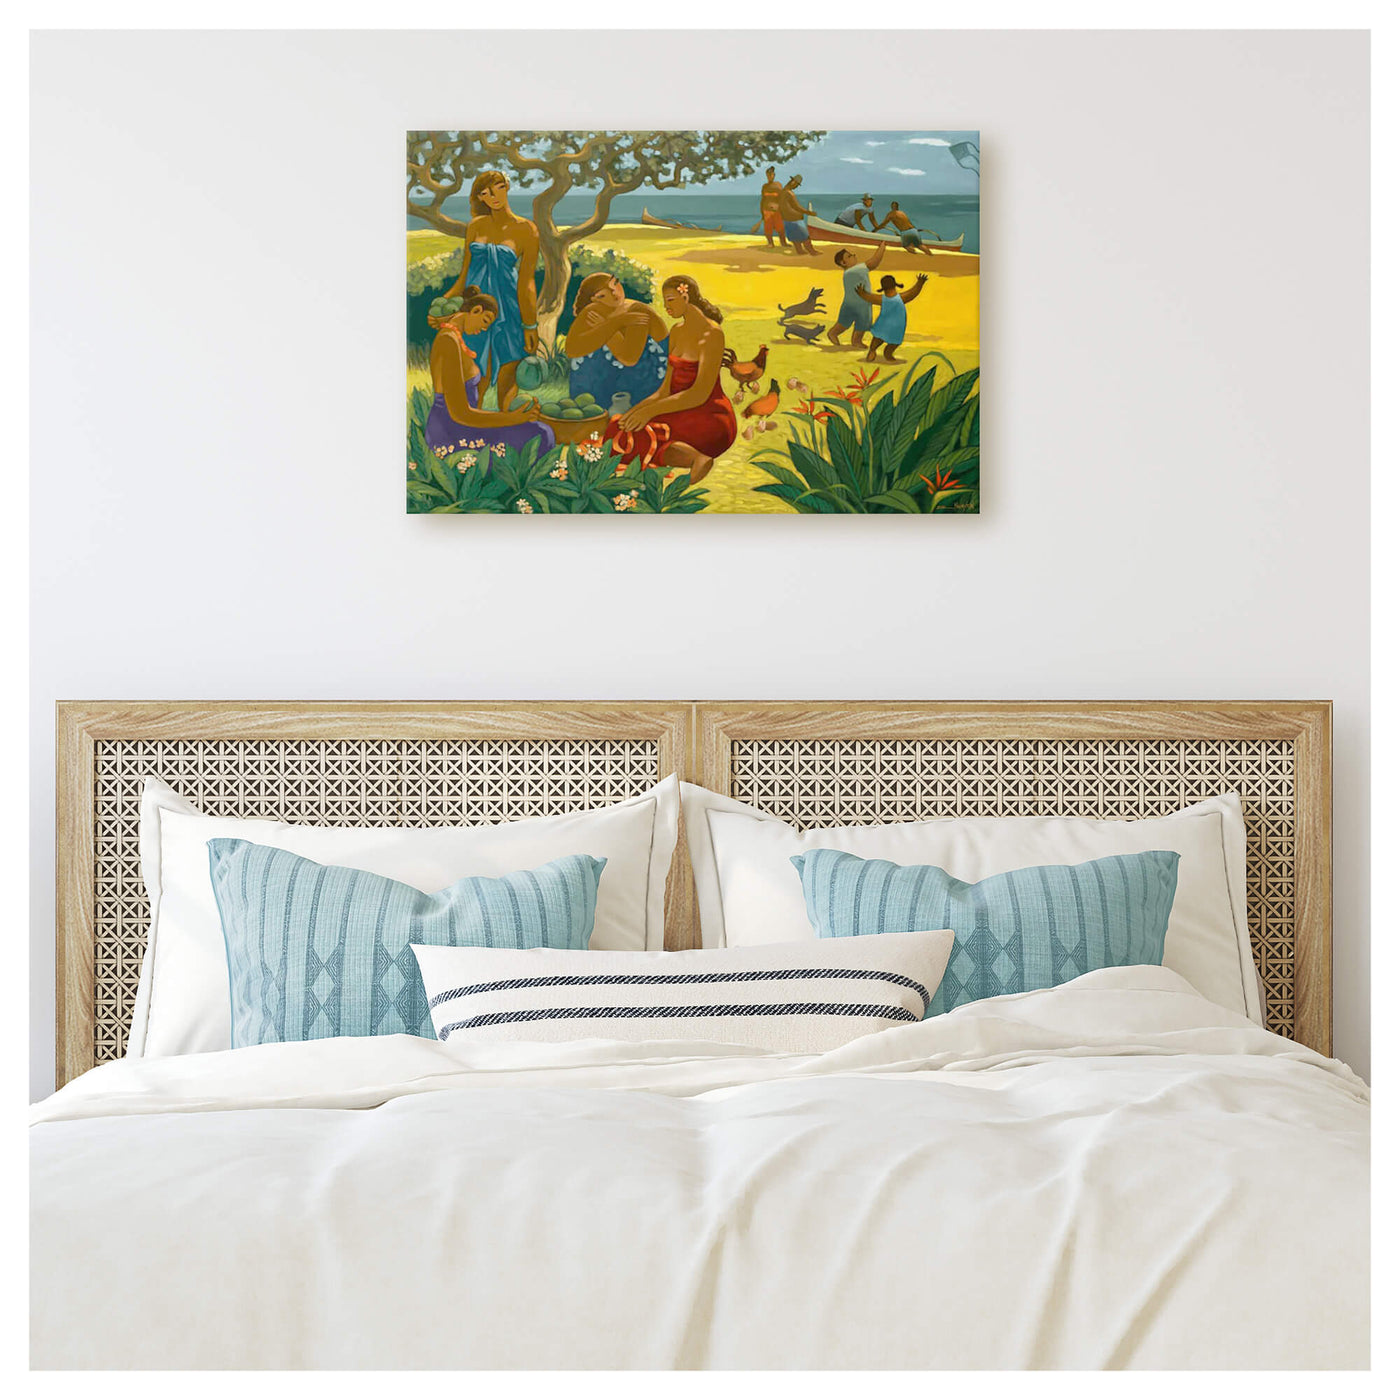 A canvas art print featuring Hawaiian beach activities with women gathering fruit, kids playing with dogs and chickens and men pulling in an outrigger canoe by Hawaii artist Tim Nguyen 